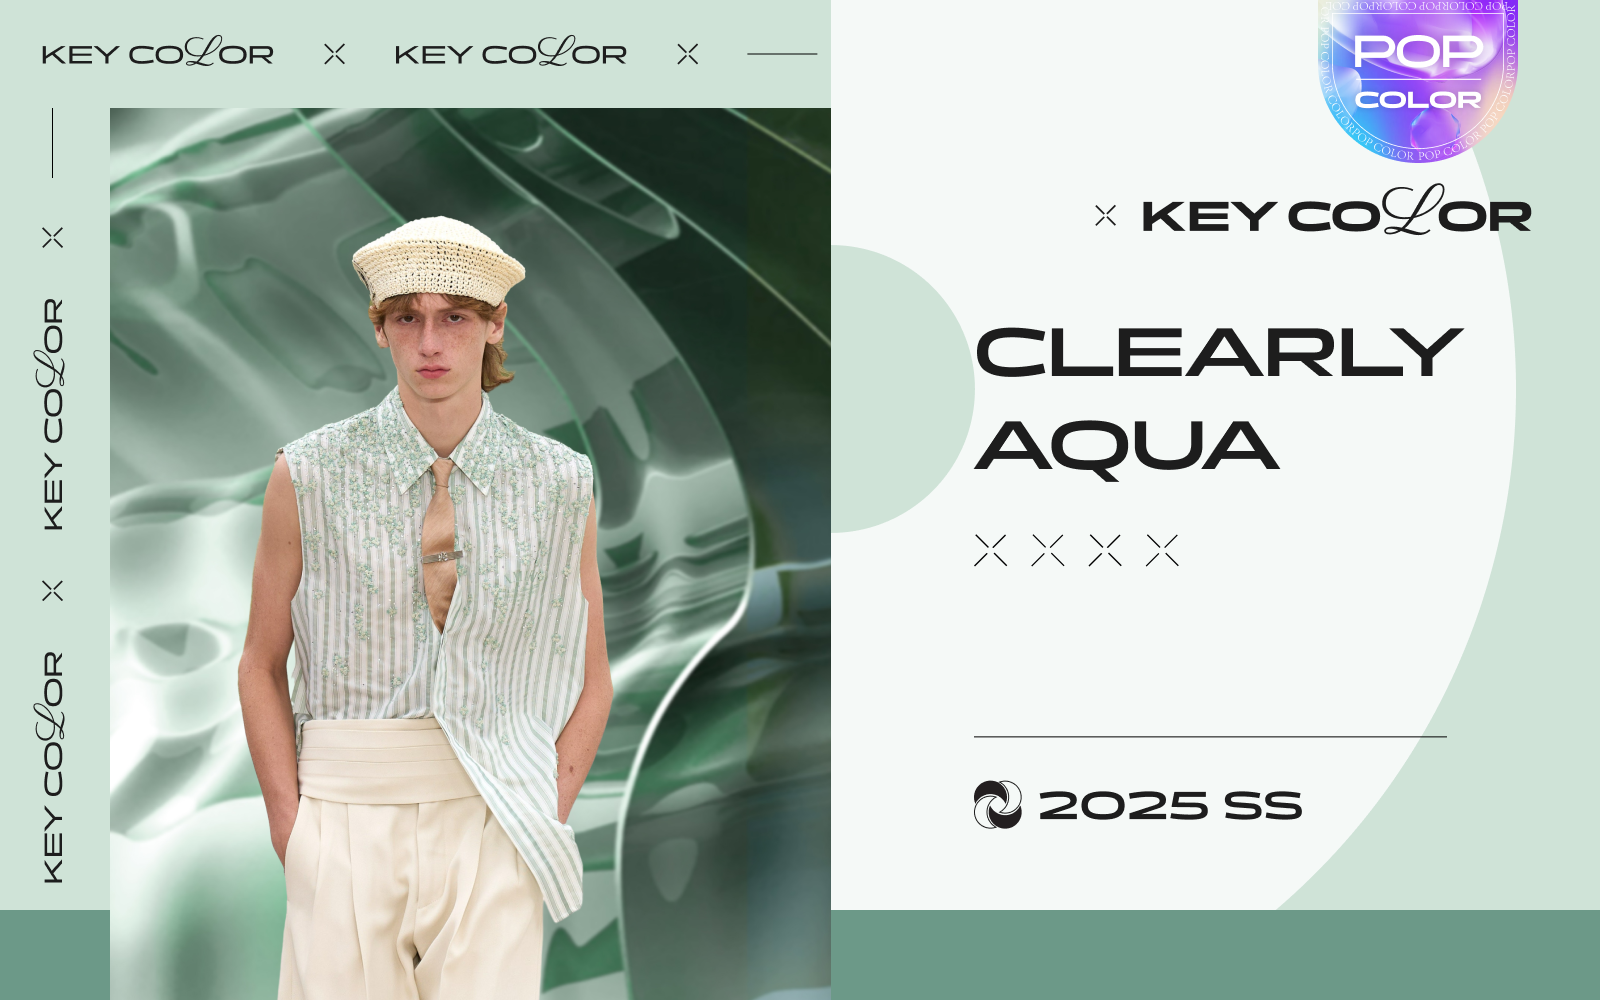 Clearly Aqua -- The Color Trend for Menswear